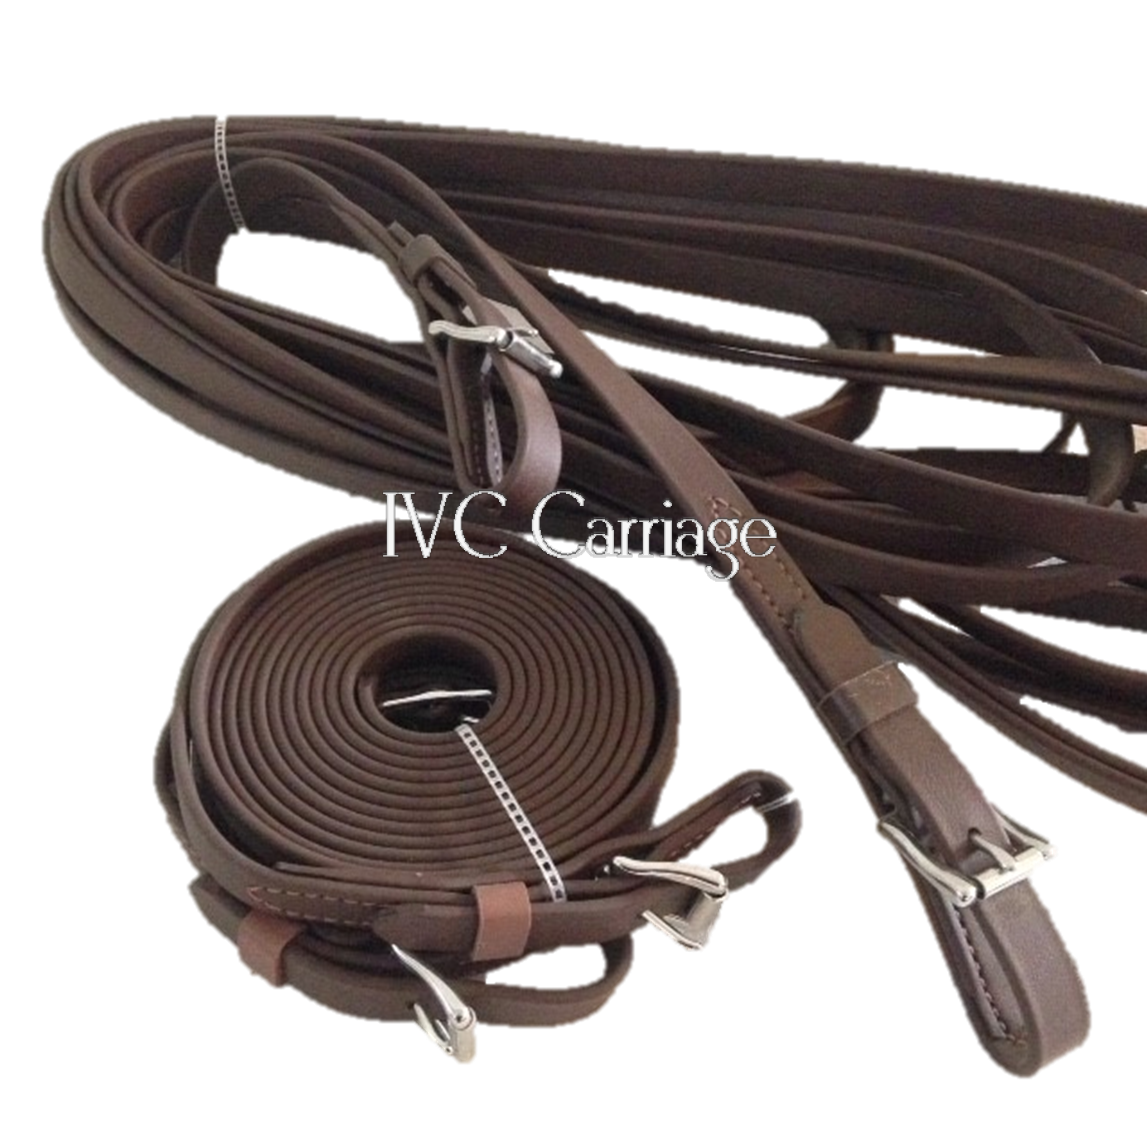 IVC Horse Harness BioThane Reins | IVC Carriage